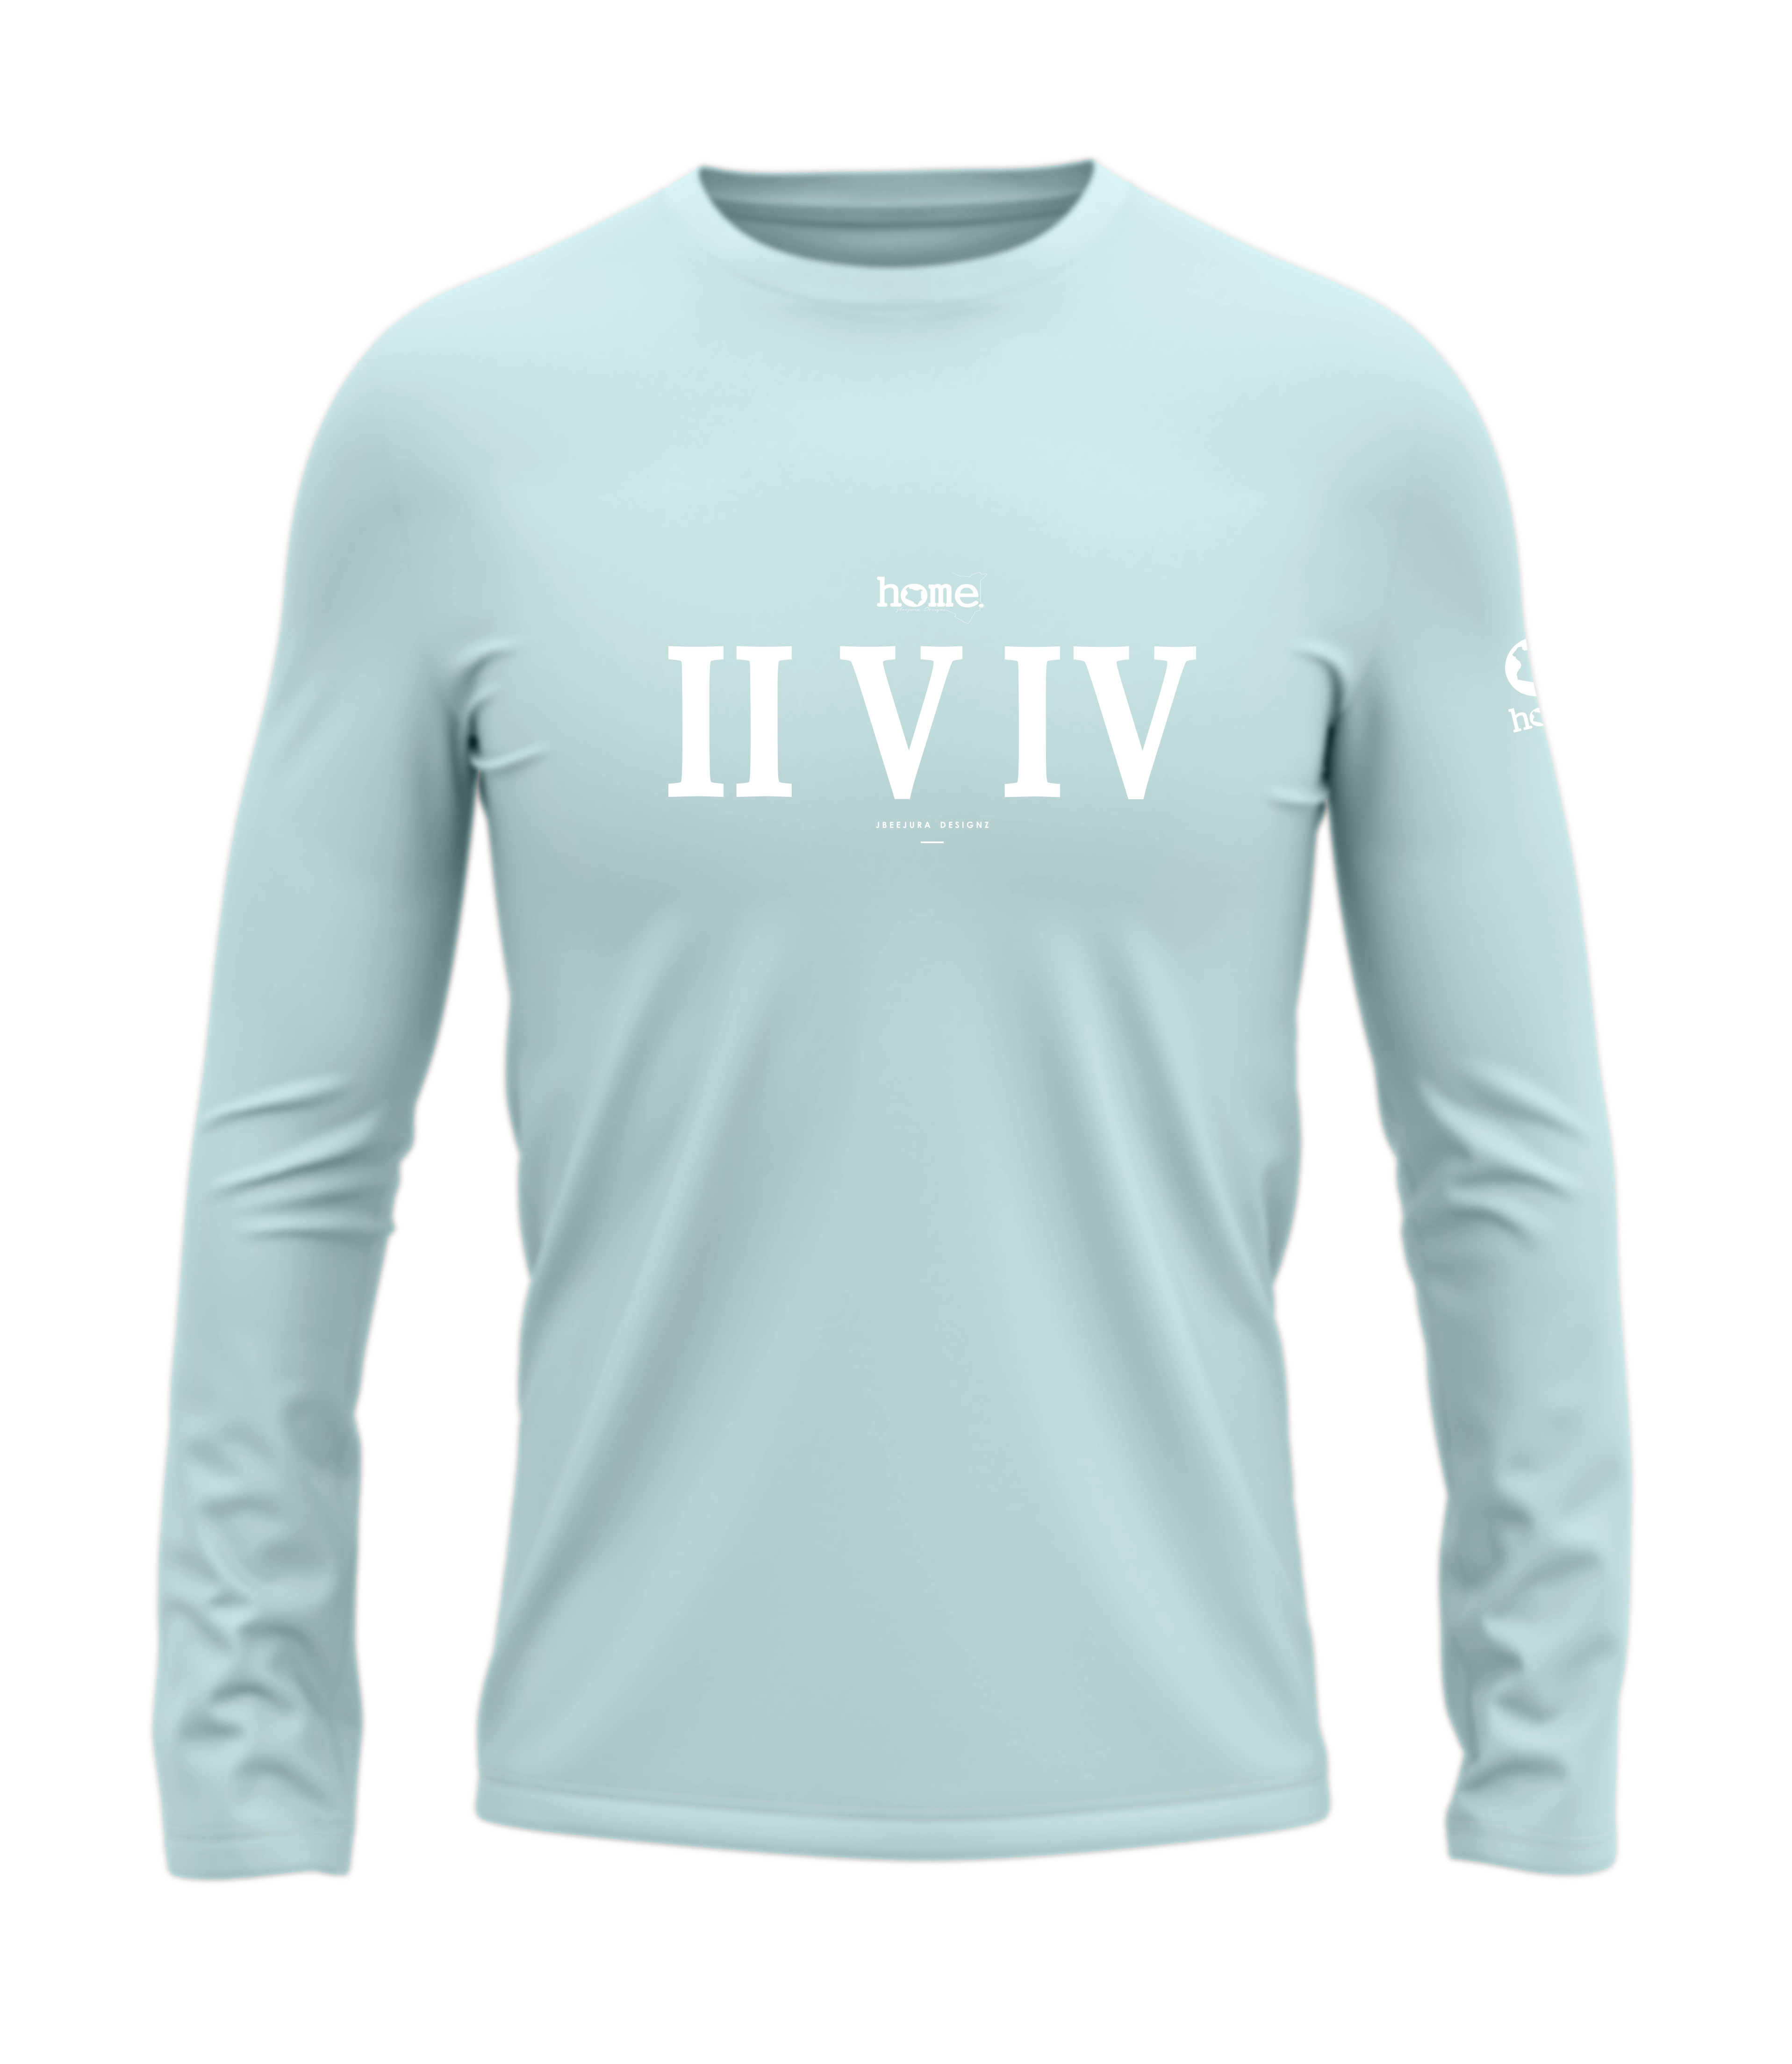 home_254 LONG-SLEEVED MISTY BLUE T-SHIRT WITH A WHITE ROMAN NUMERALS PRINT – COTTON PLUS FABRIC